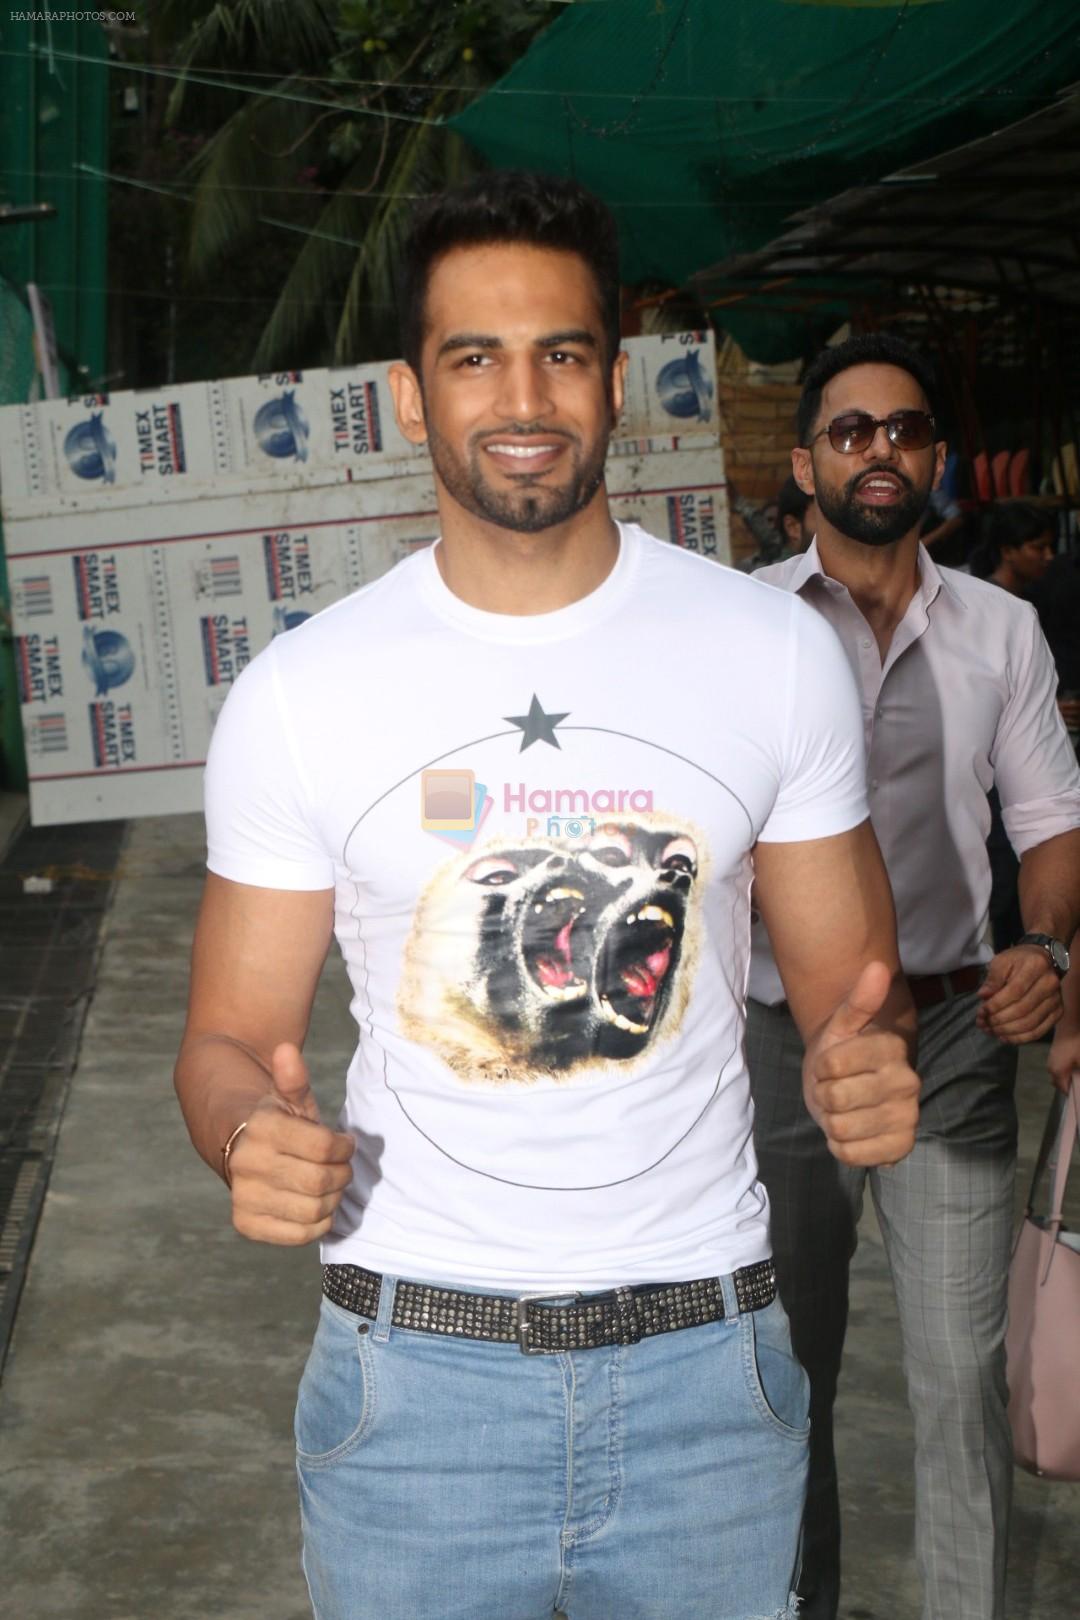 Upen Patel at the Opening Ceremony of The Roots Premier League on 13th Sept 2017